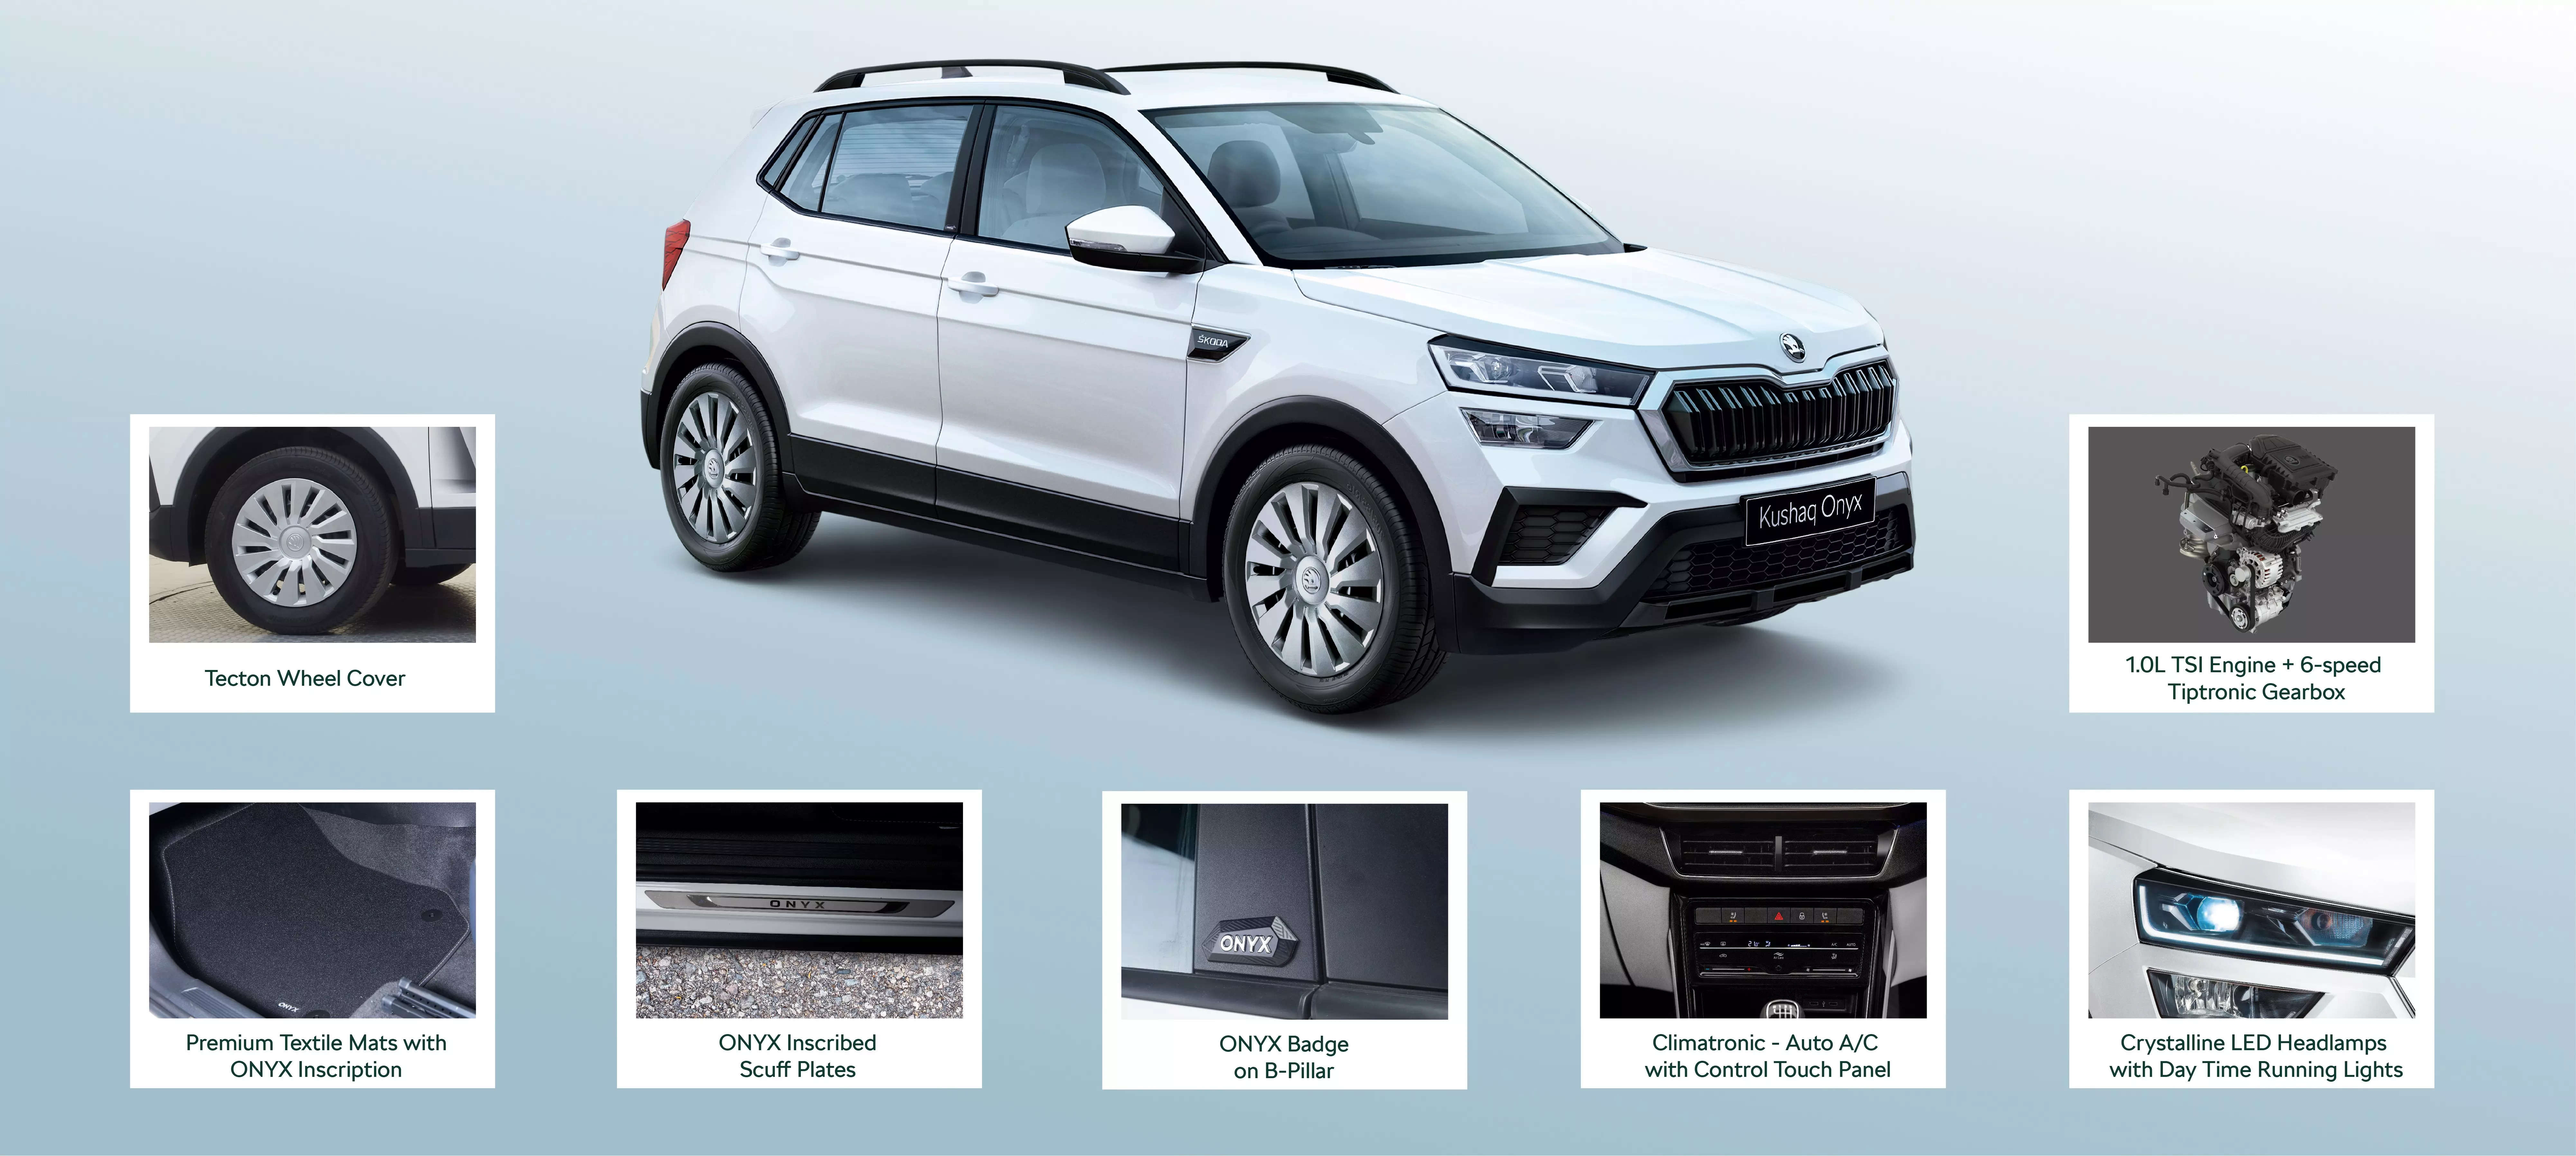 <p>The Onyx AT, like the Onyx before it, slots between the current Active and Ambition variants of Skoda’s best-selling SUV. </p>